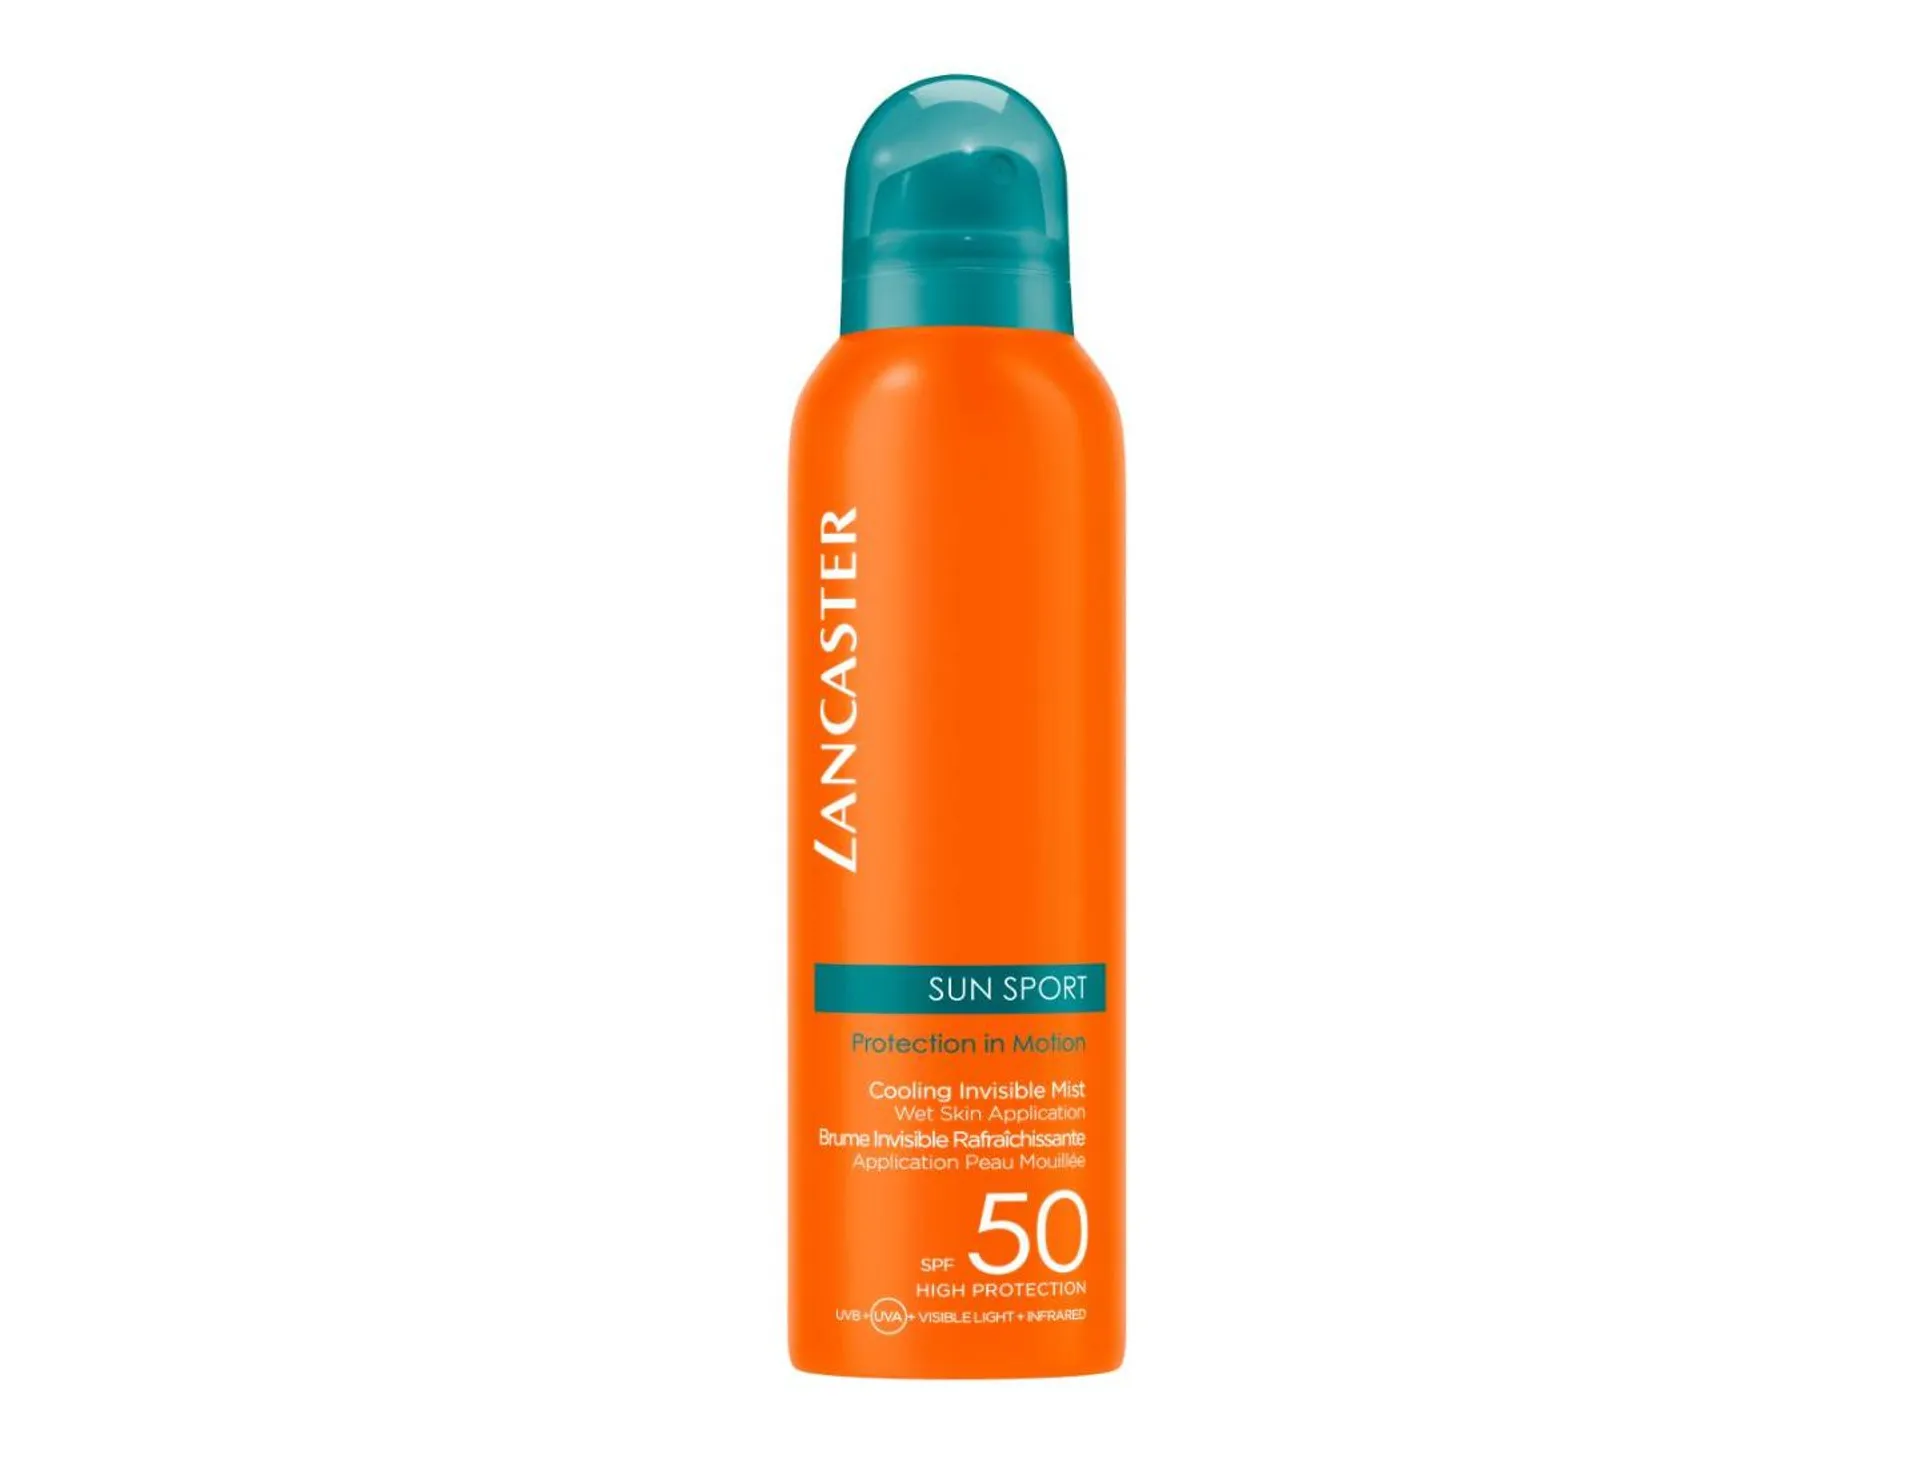 SUN SPORT COOLING INVISIBLE MIST SPF50